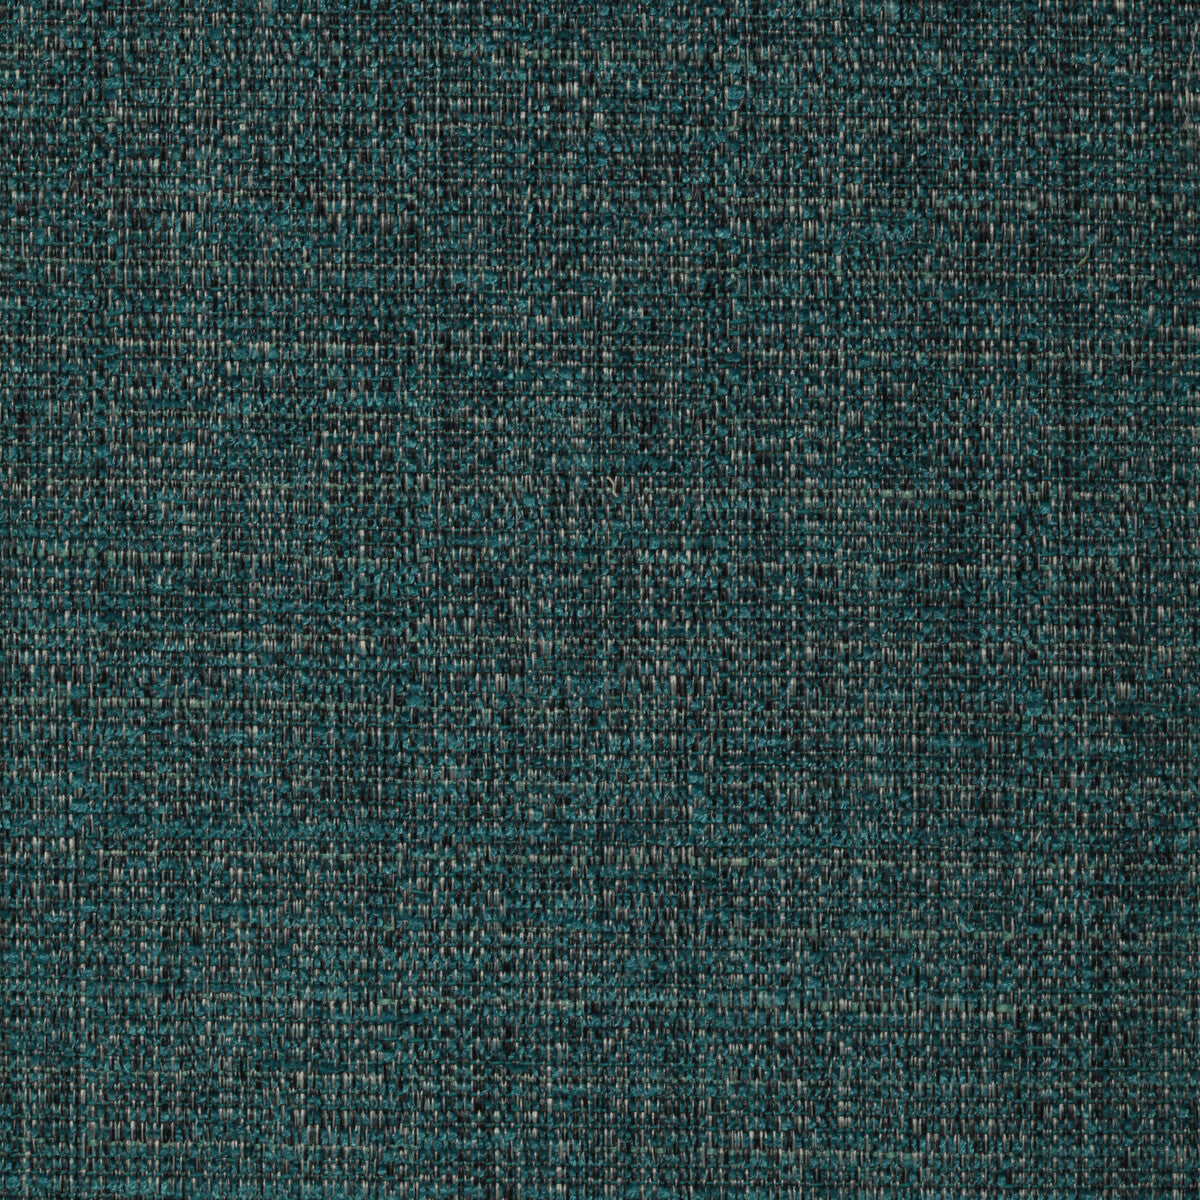 Kravet Contract fabric in 35128-35 color - pattern 35128.35.0 - by Kravet Contract in the Crypton Incase collection